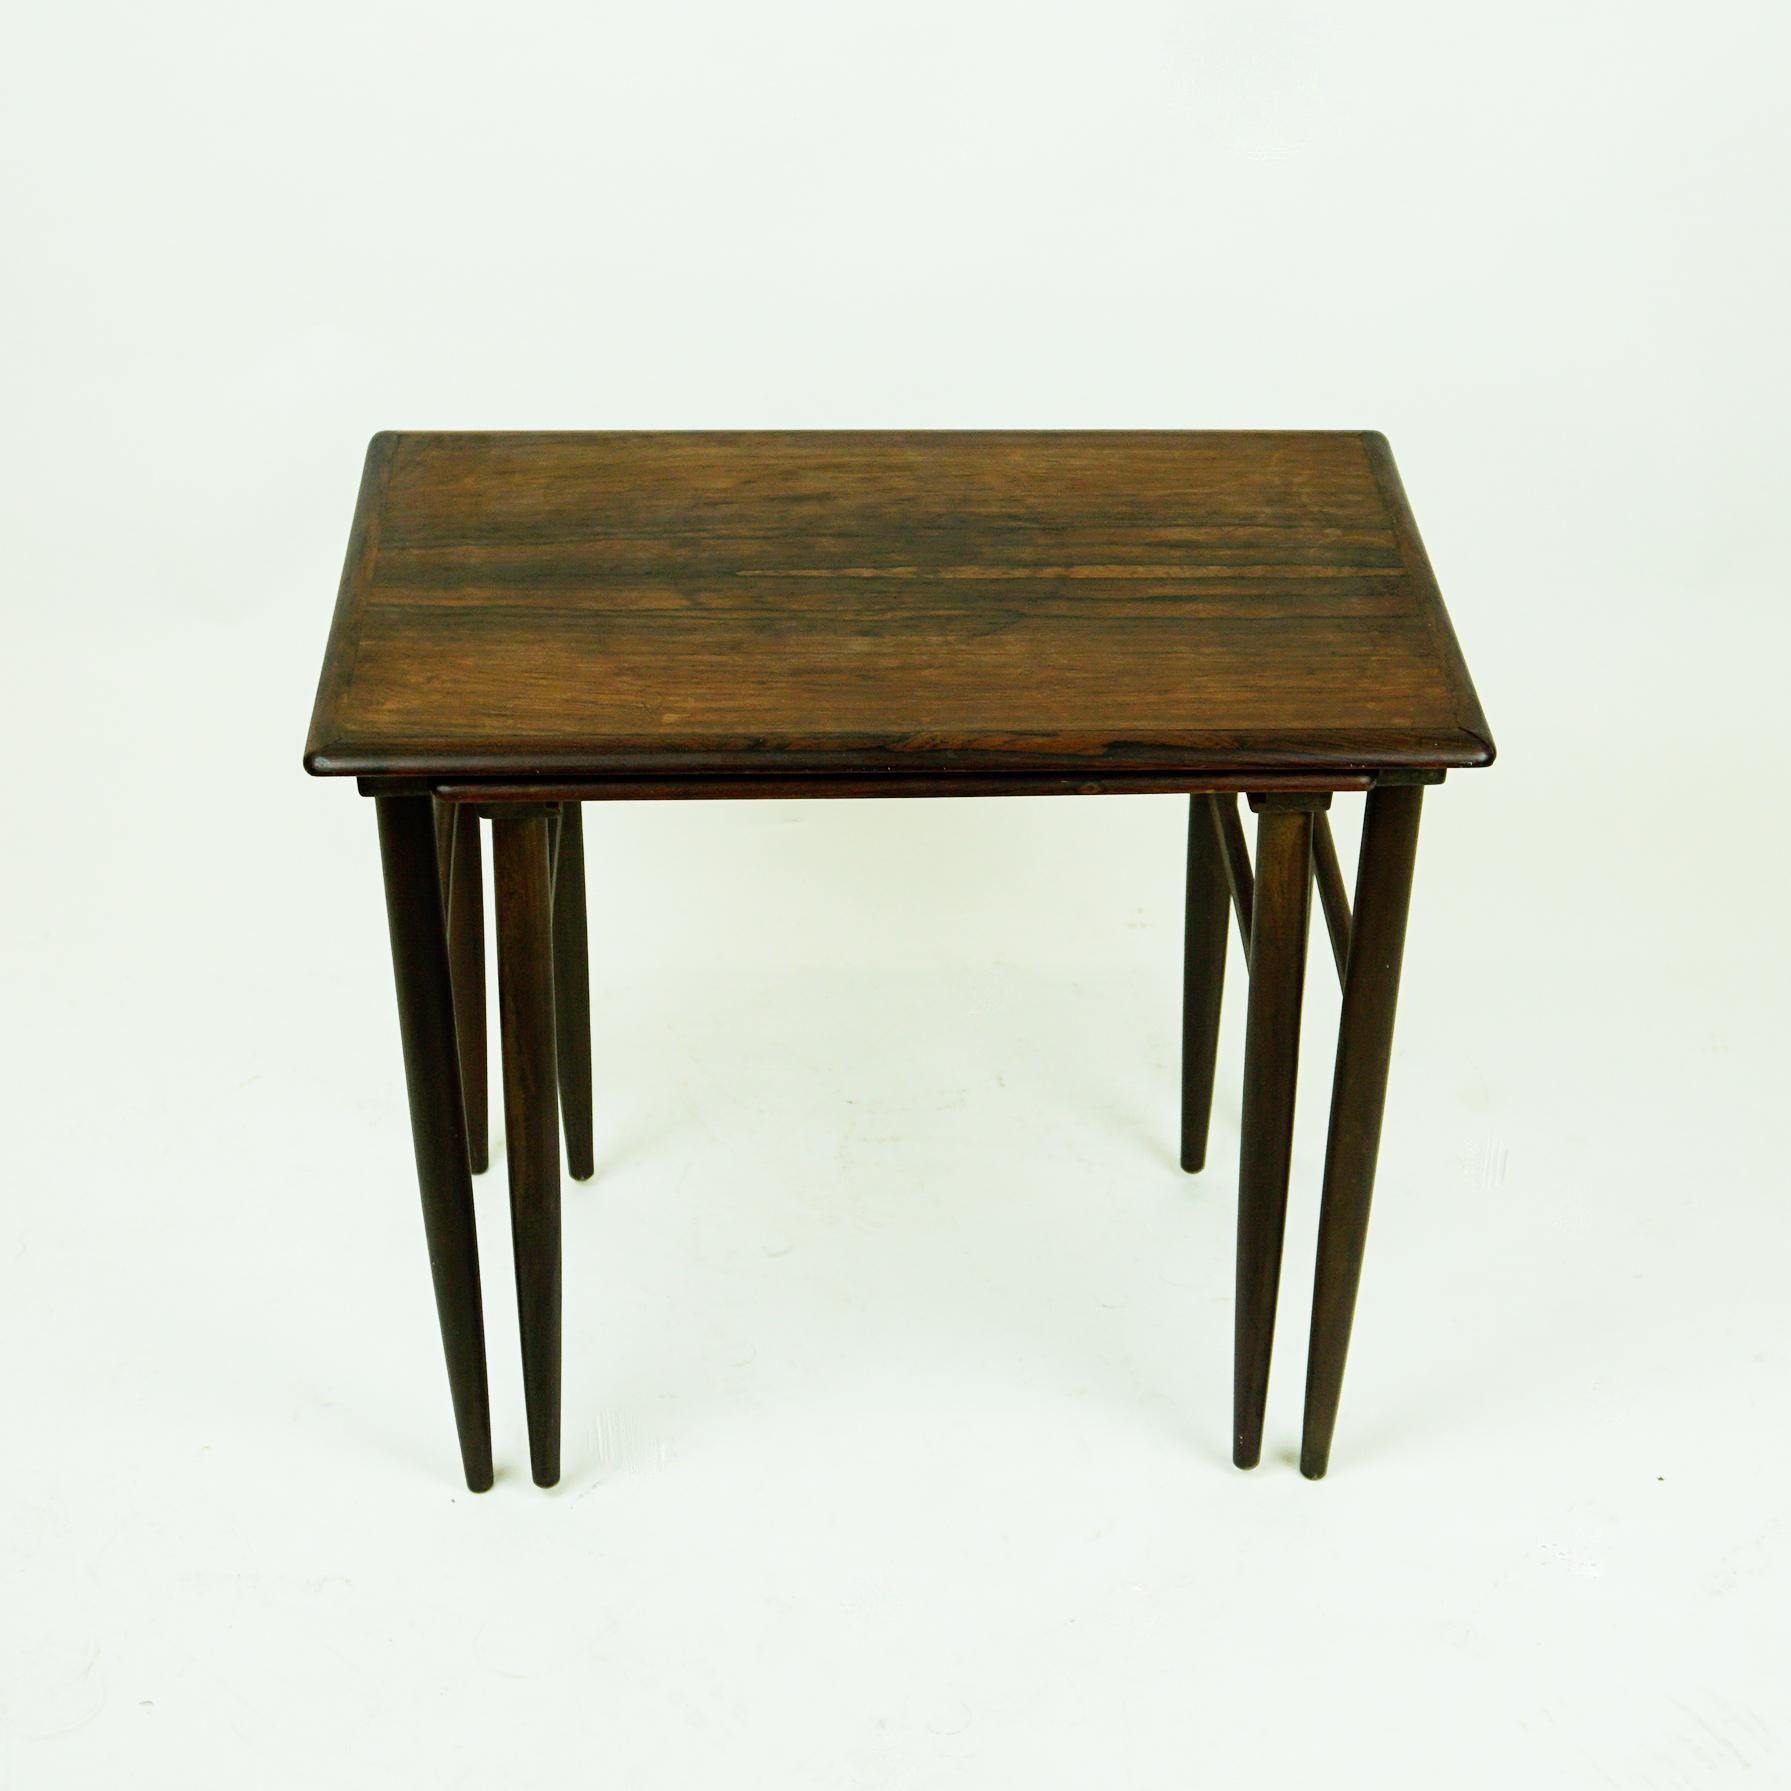 This set of two rosewood nesting tables was designed by Poul Hundevad for Fabian Denmark in the 1960s.
The tables are made from finest rosewood and are in very good slightly restored condition. Beautiful tapered legs the small table slides into the